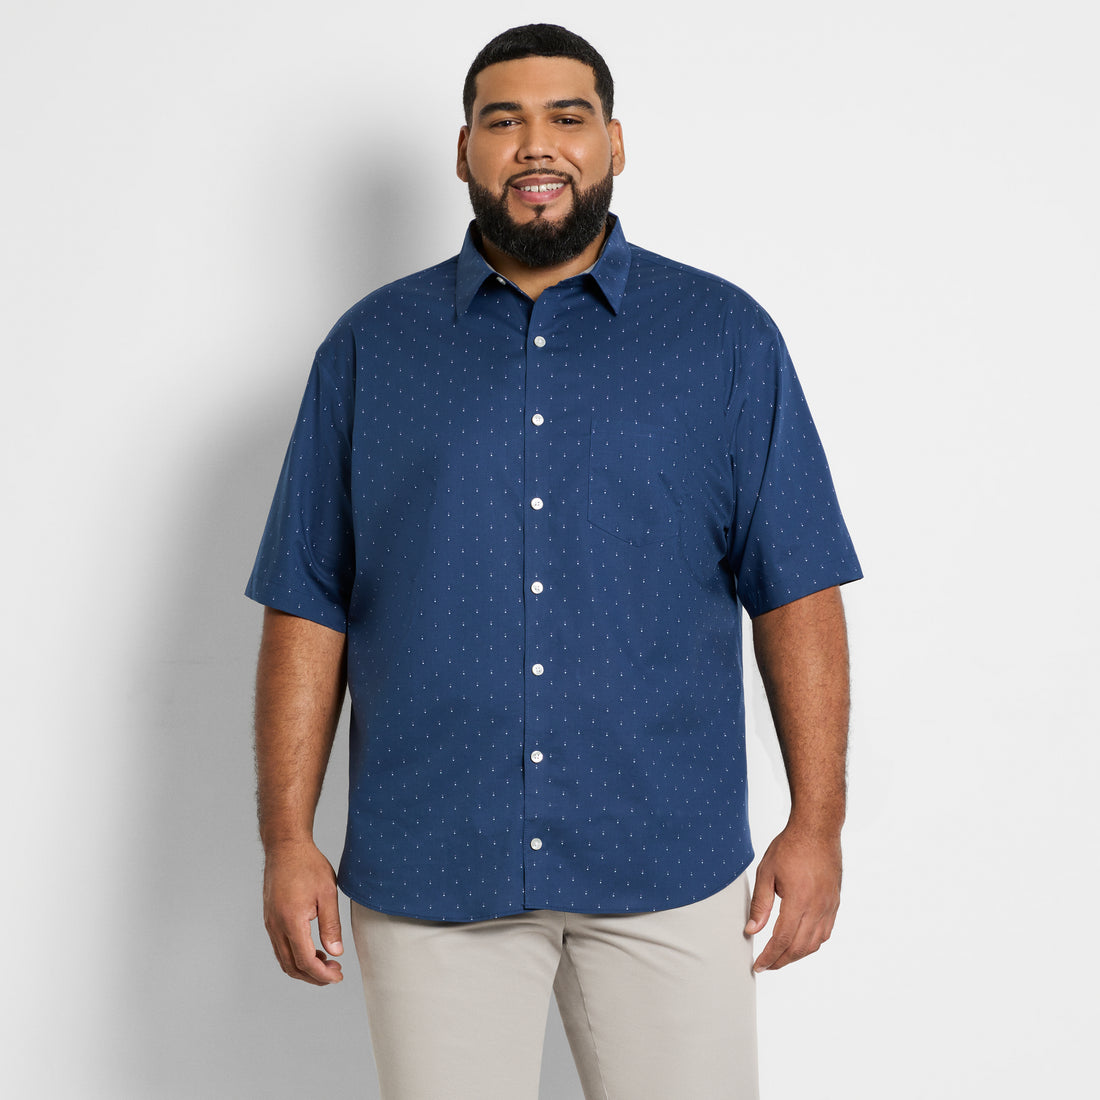 Big and Tall Men's Clothing